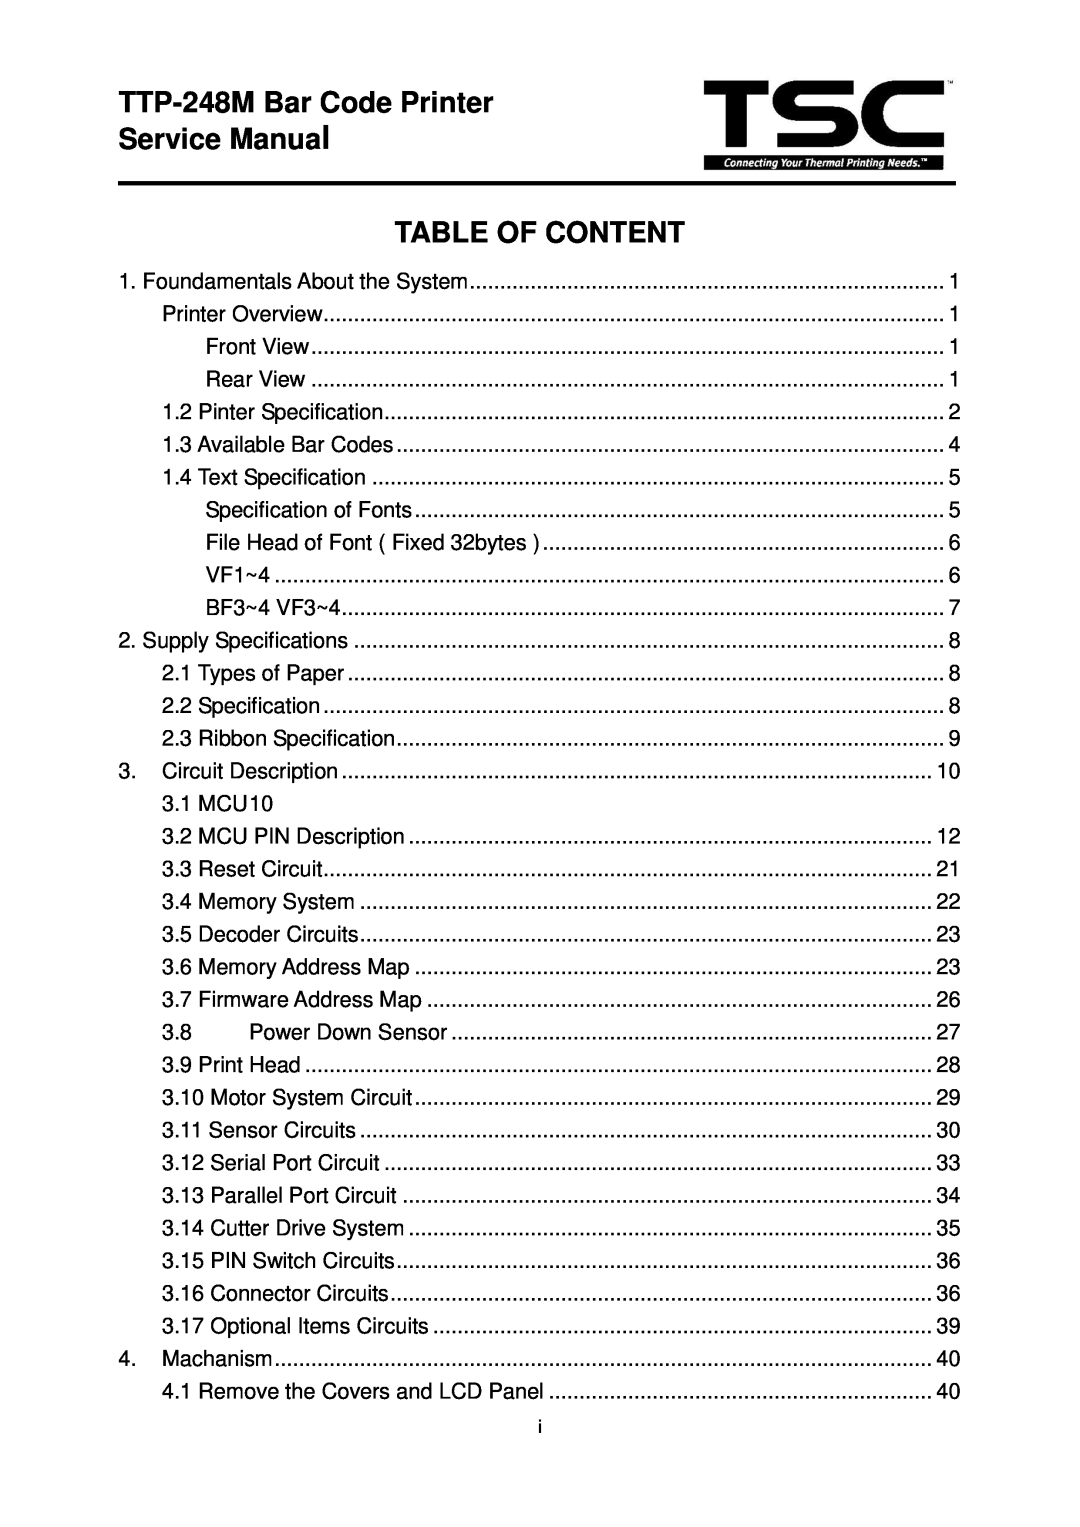 The Speaker Company TTP 248M service manual TTP-248M Bar Code Printer Service Manual TABLE OF CONTENT 